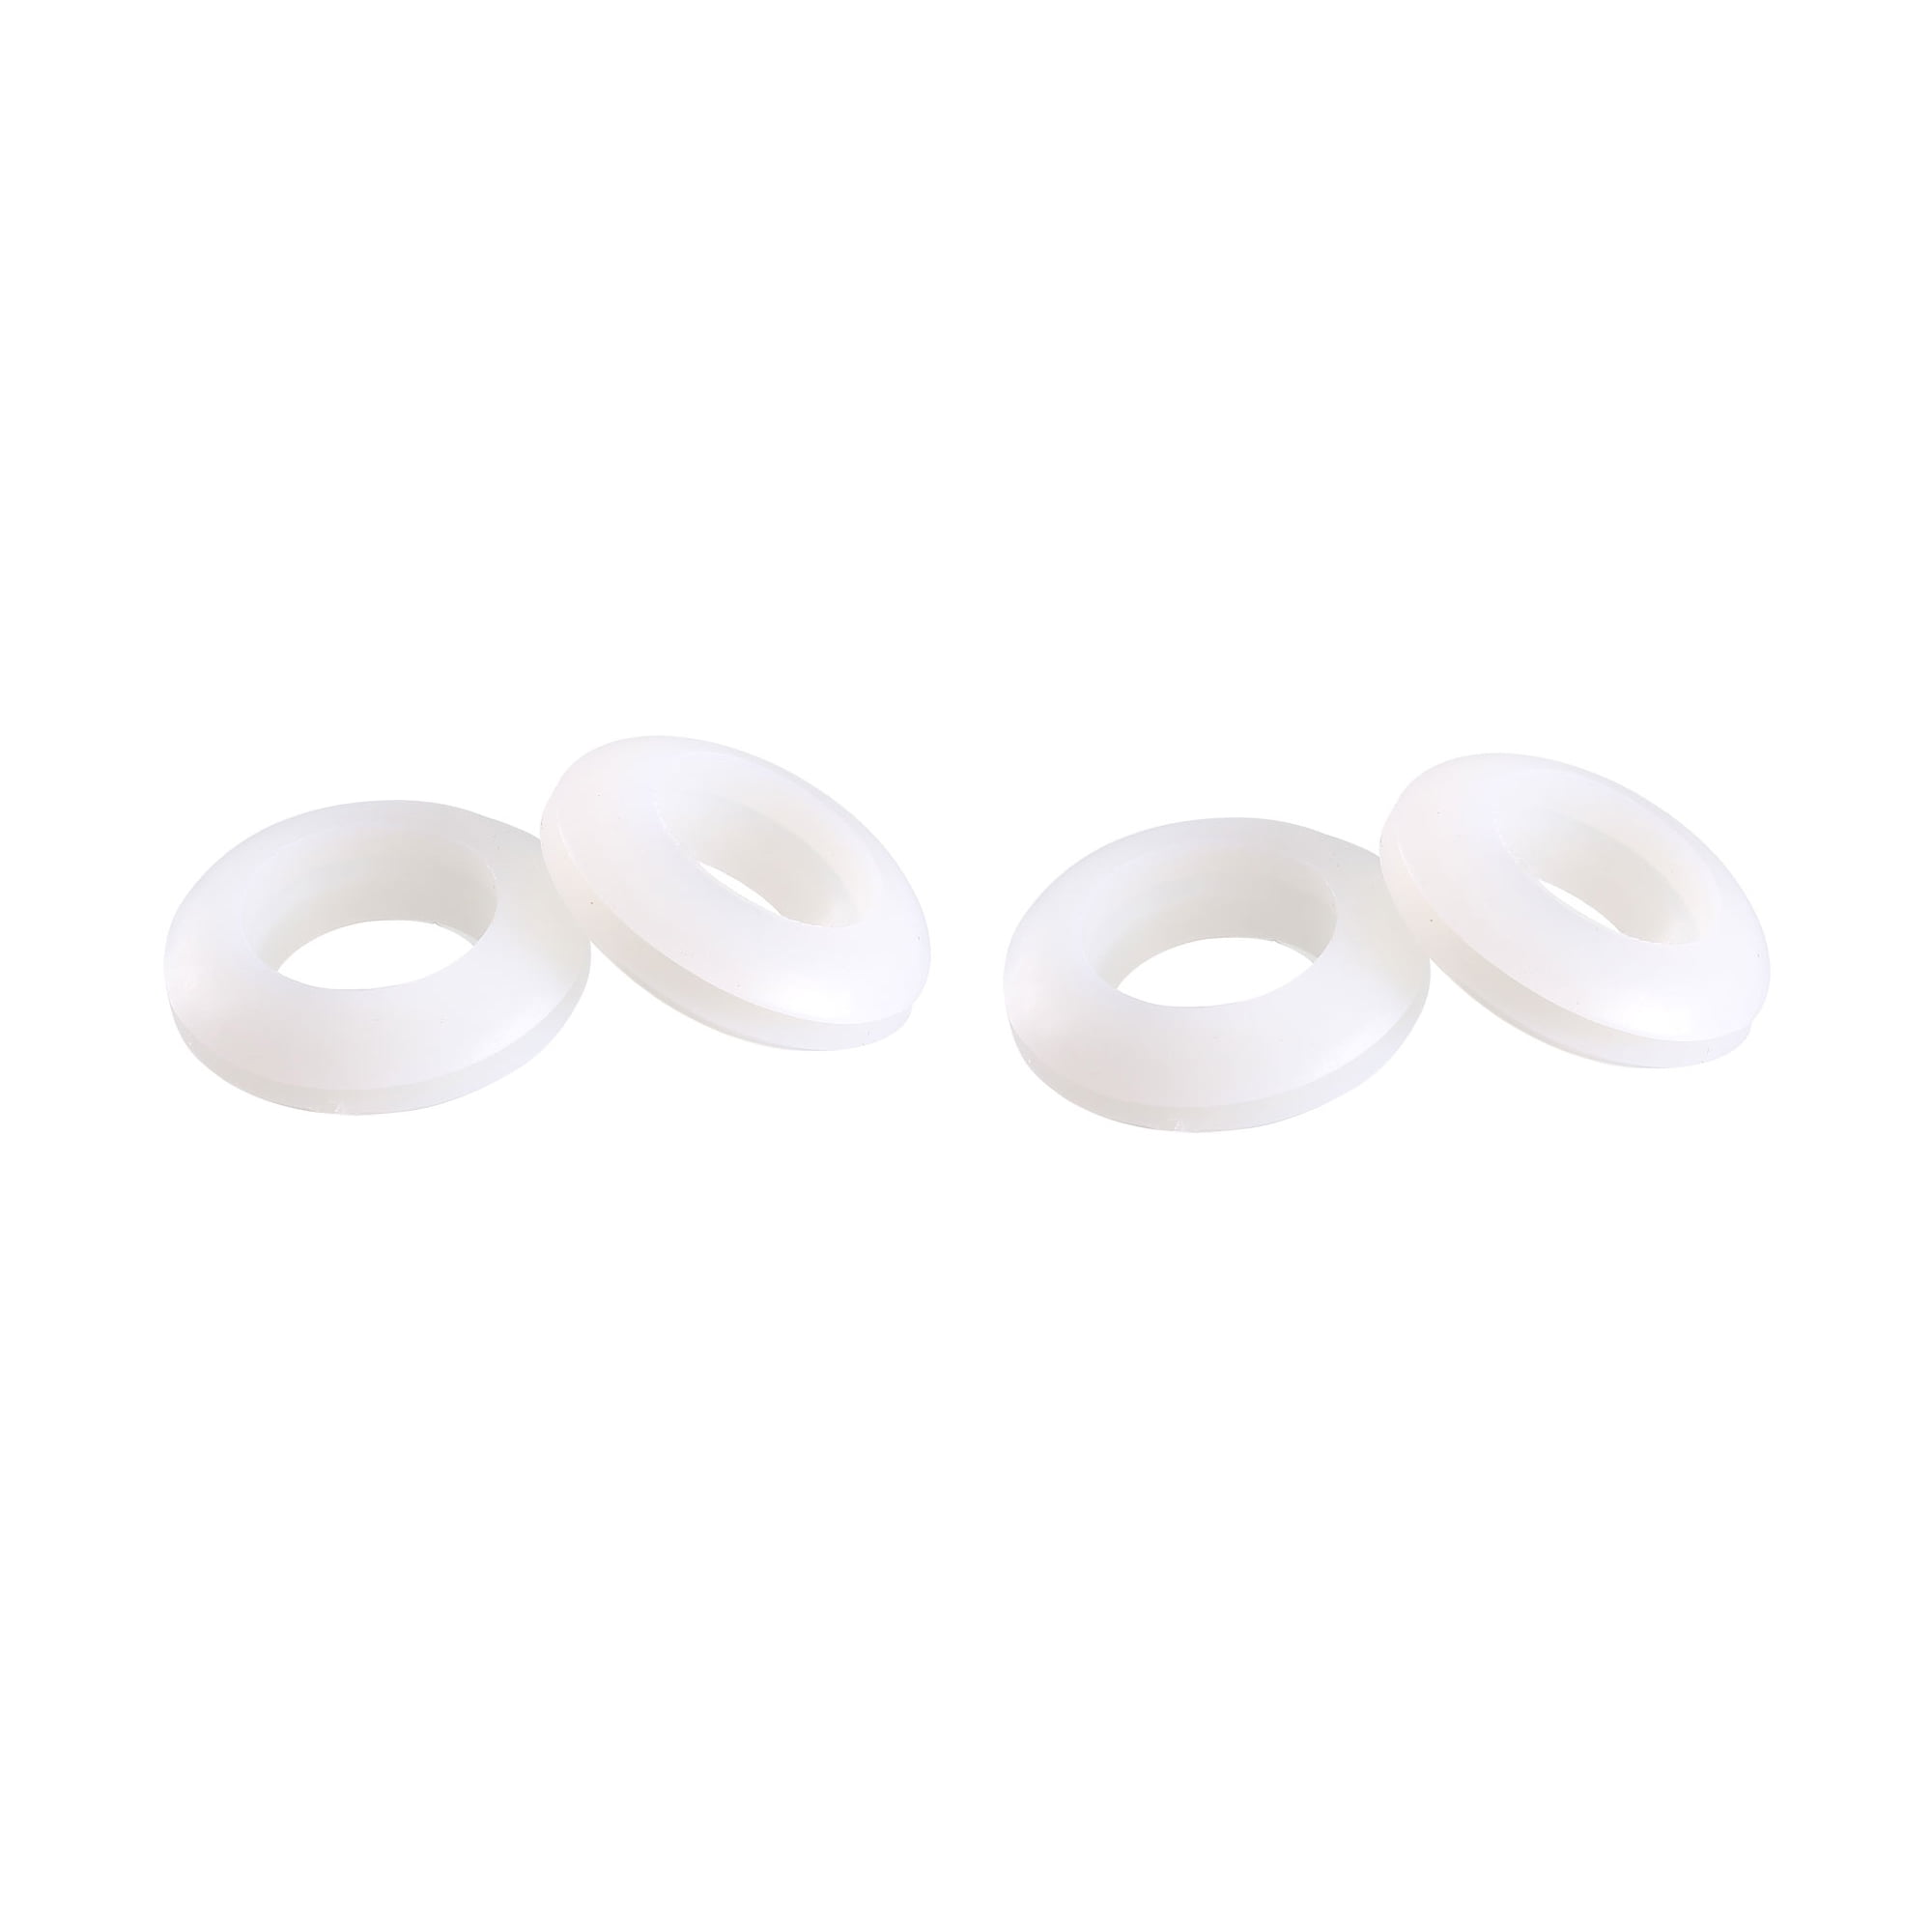 FREE P&P Rubber Grommet 16mm-Open Wiring Type Packs of 1, 2, 6, 10 or 20 